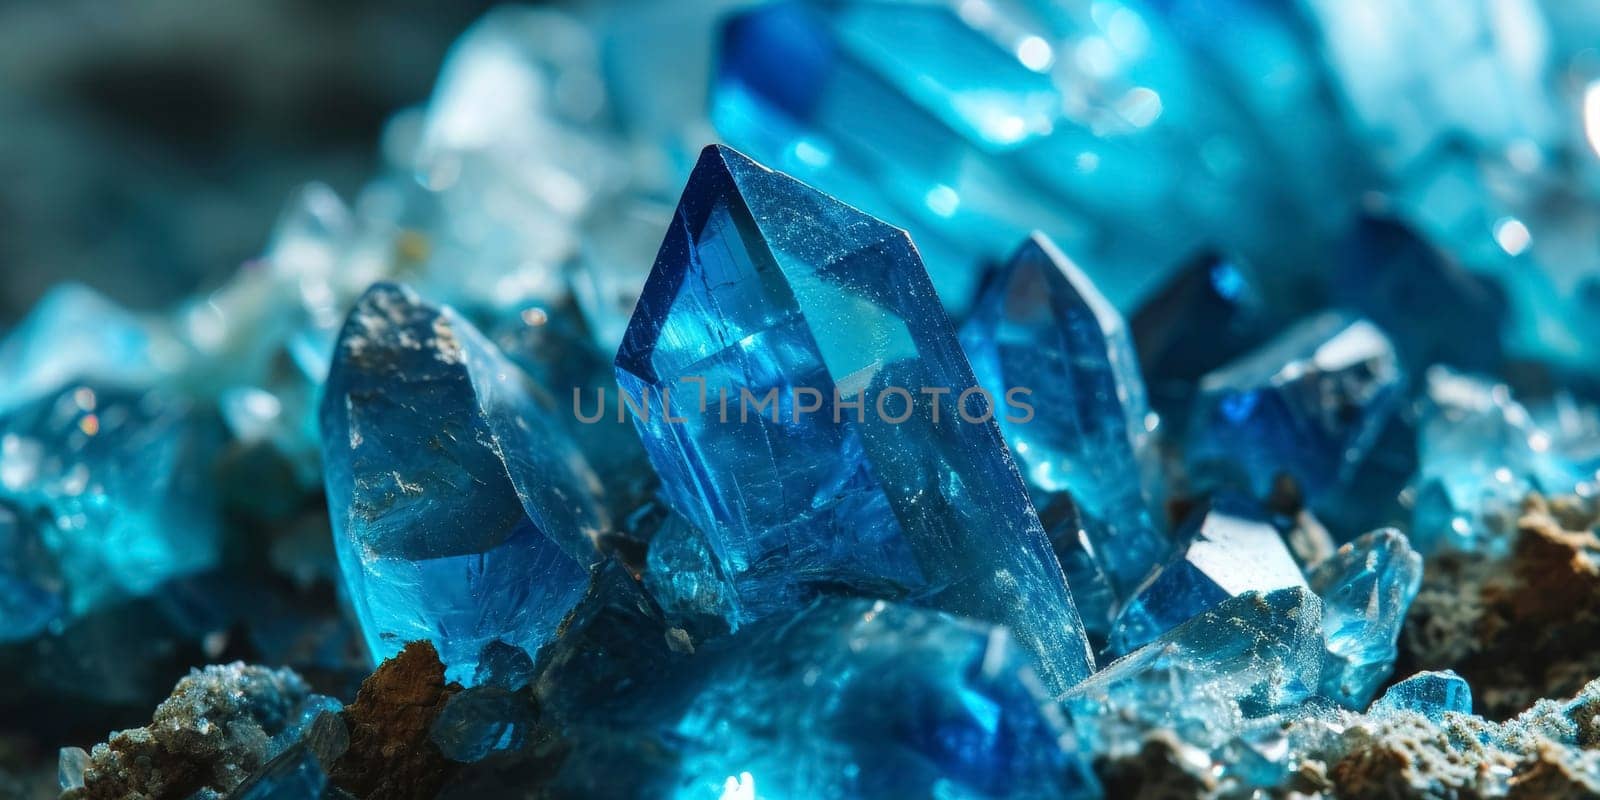 Close-up of radiant blue mineral crystals with sharp edges and a deep blue color.